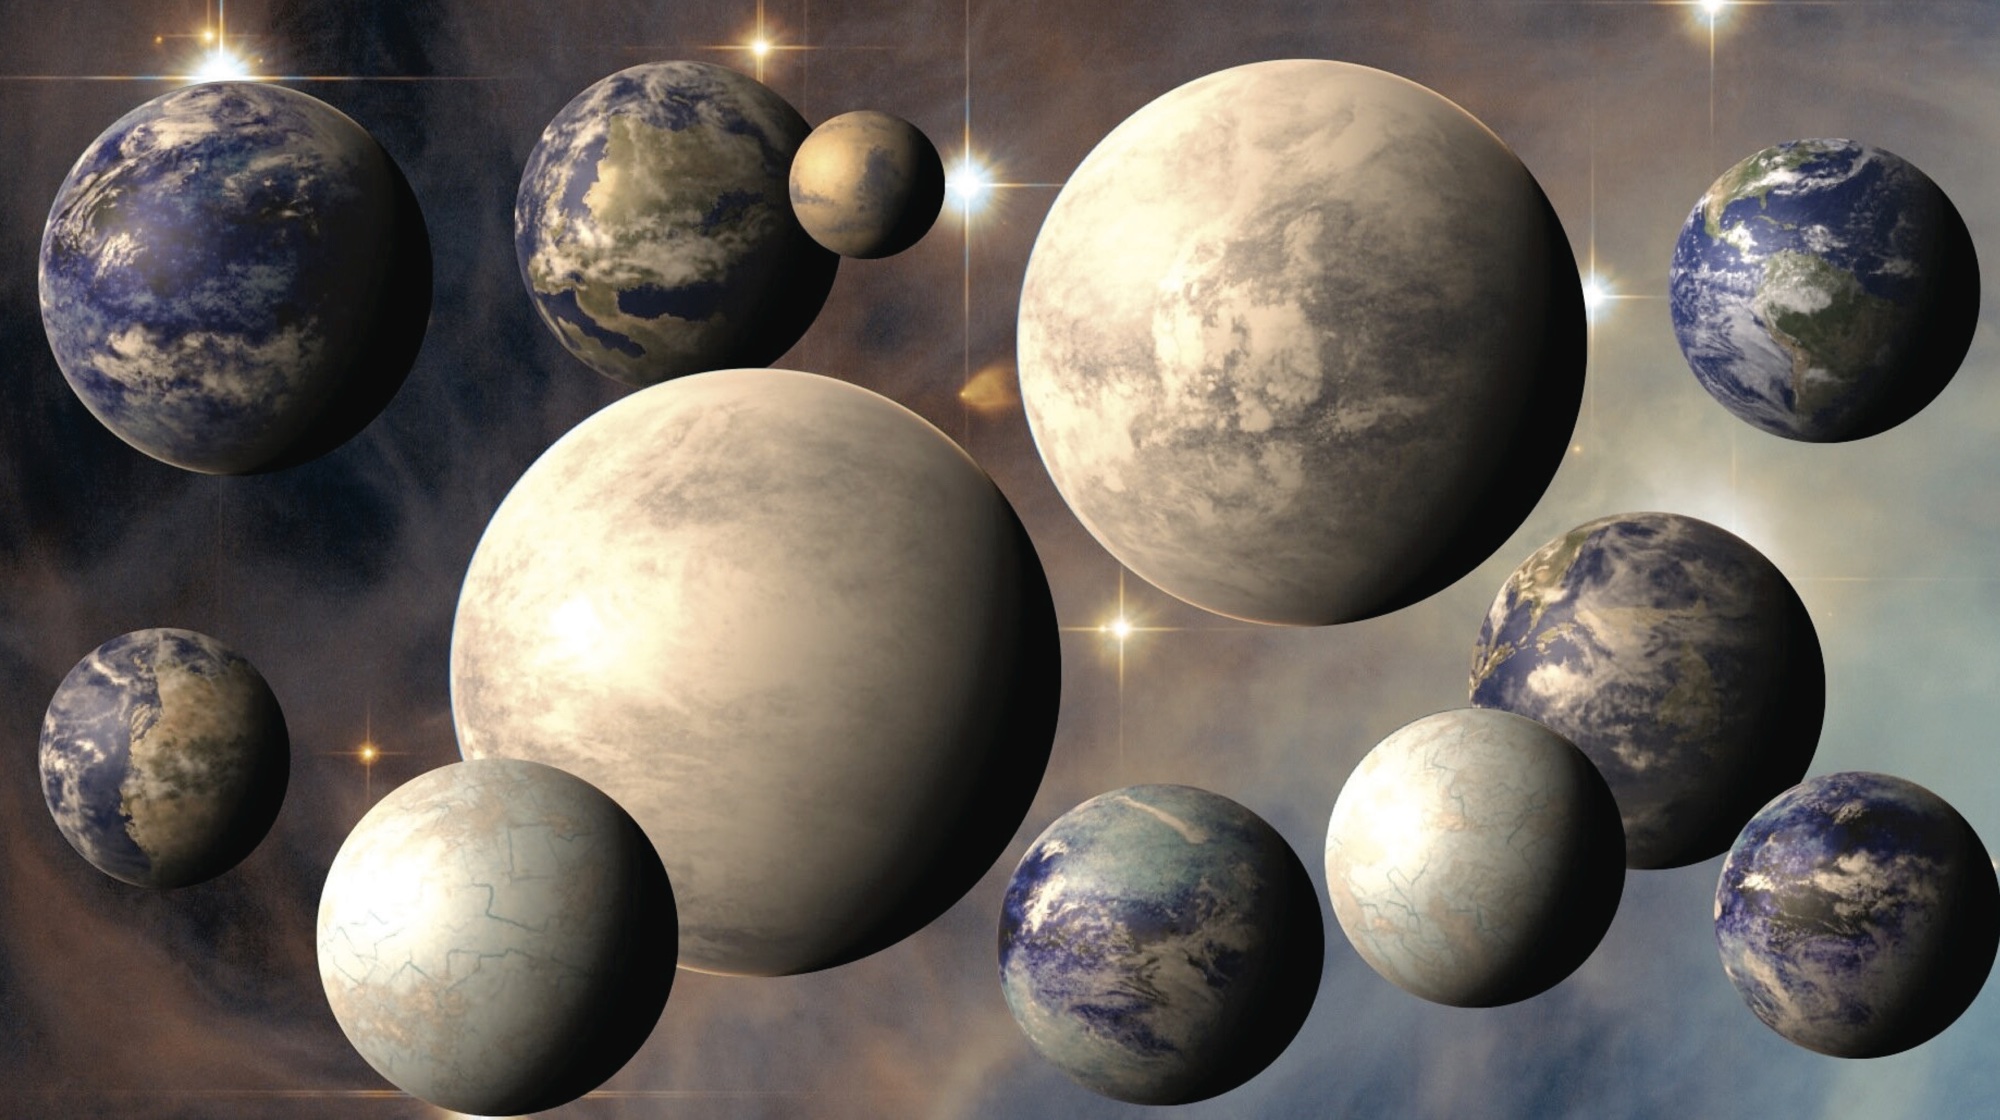 Astronomers have found potentially habitable planets suitable for studying Earth